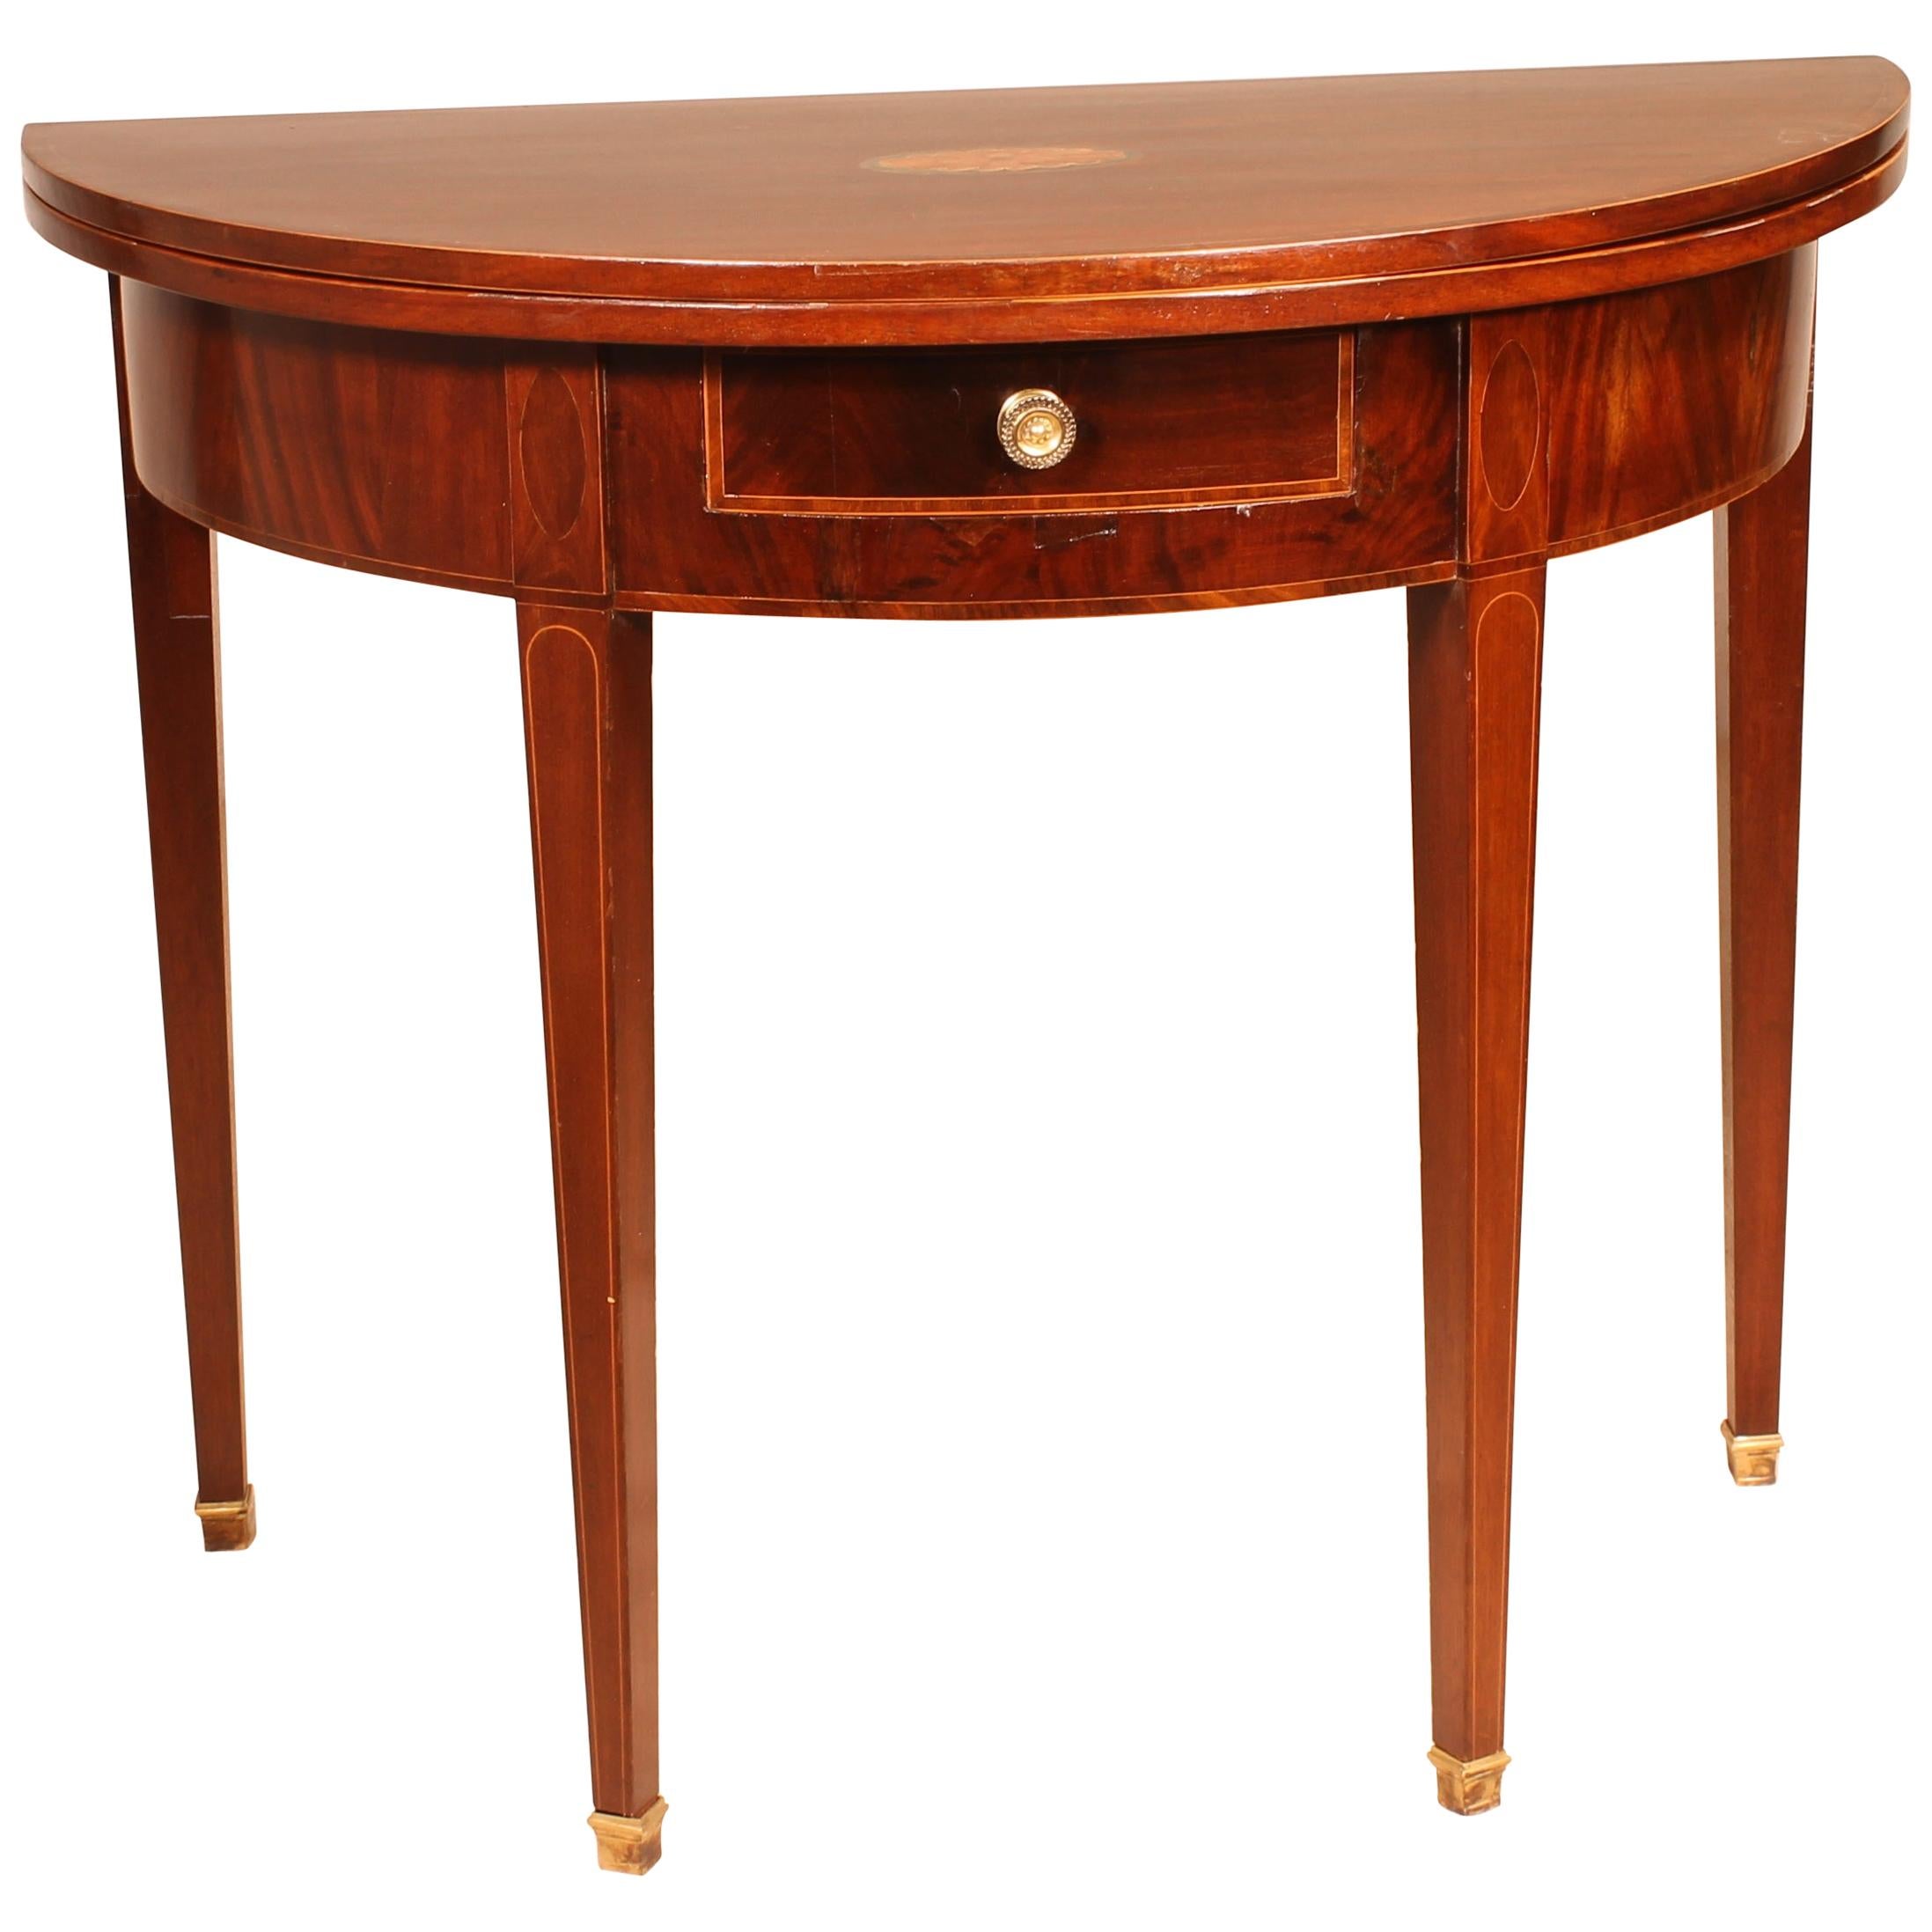 Half Moon Console / Game Table 19th Century in Mahogany Regency Period